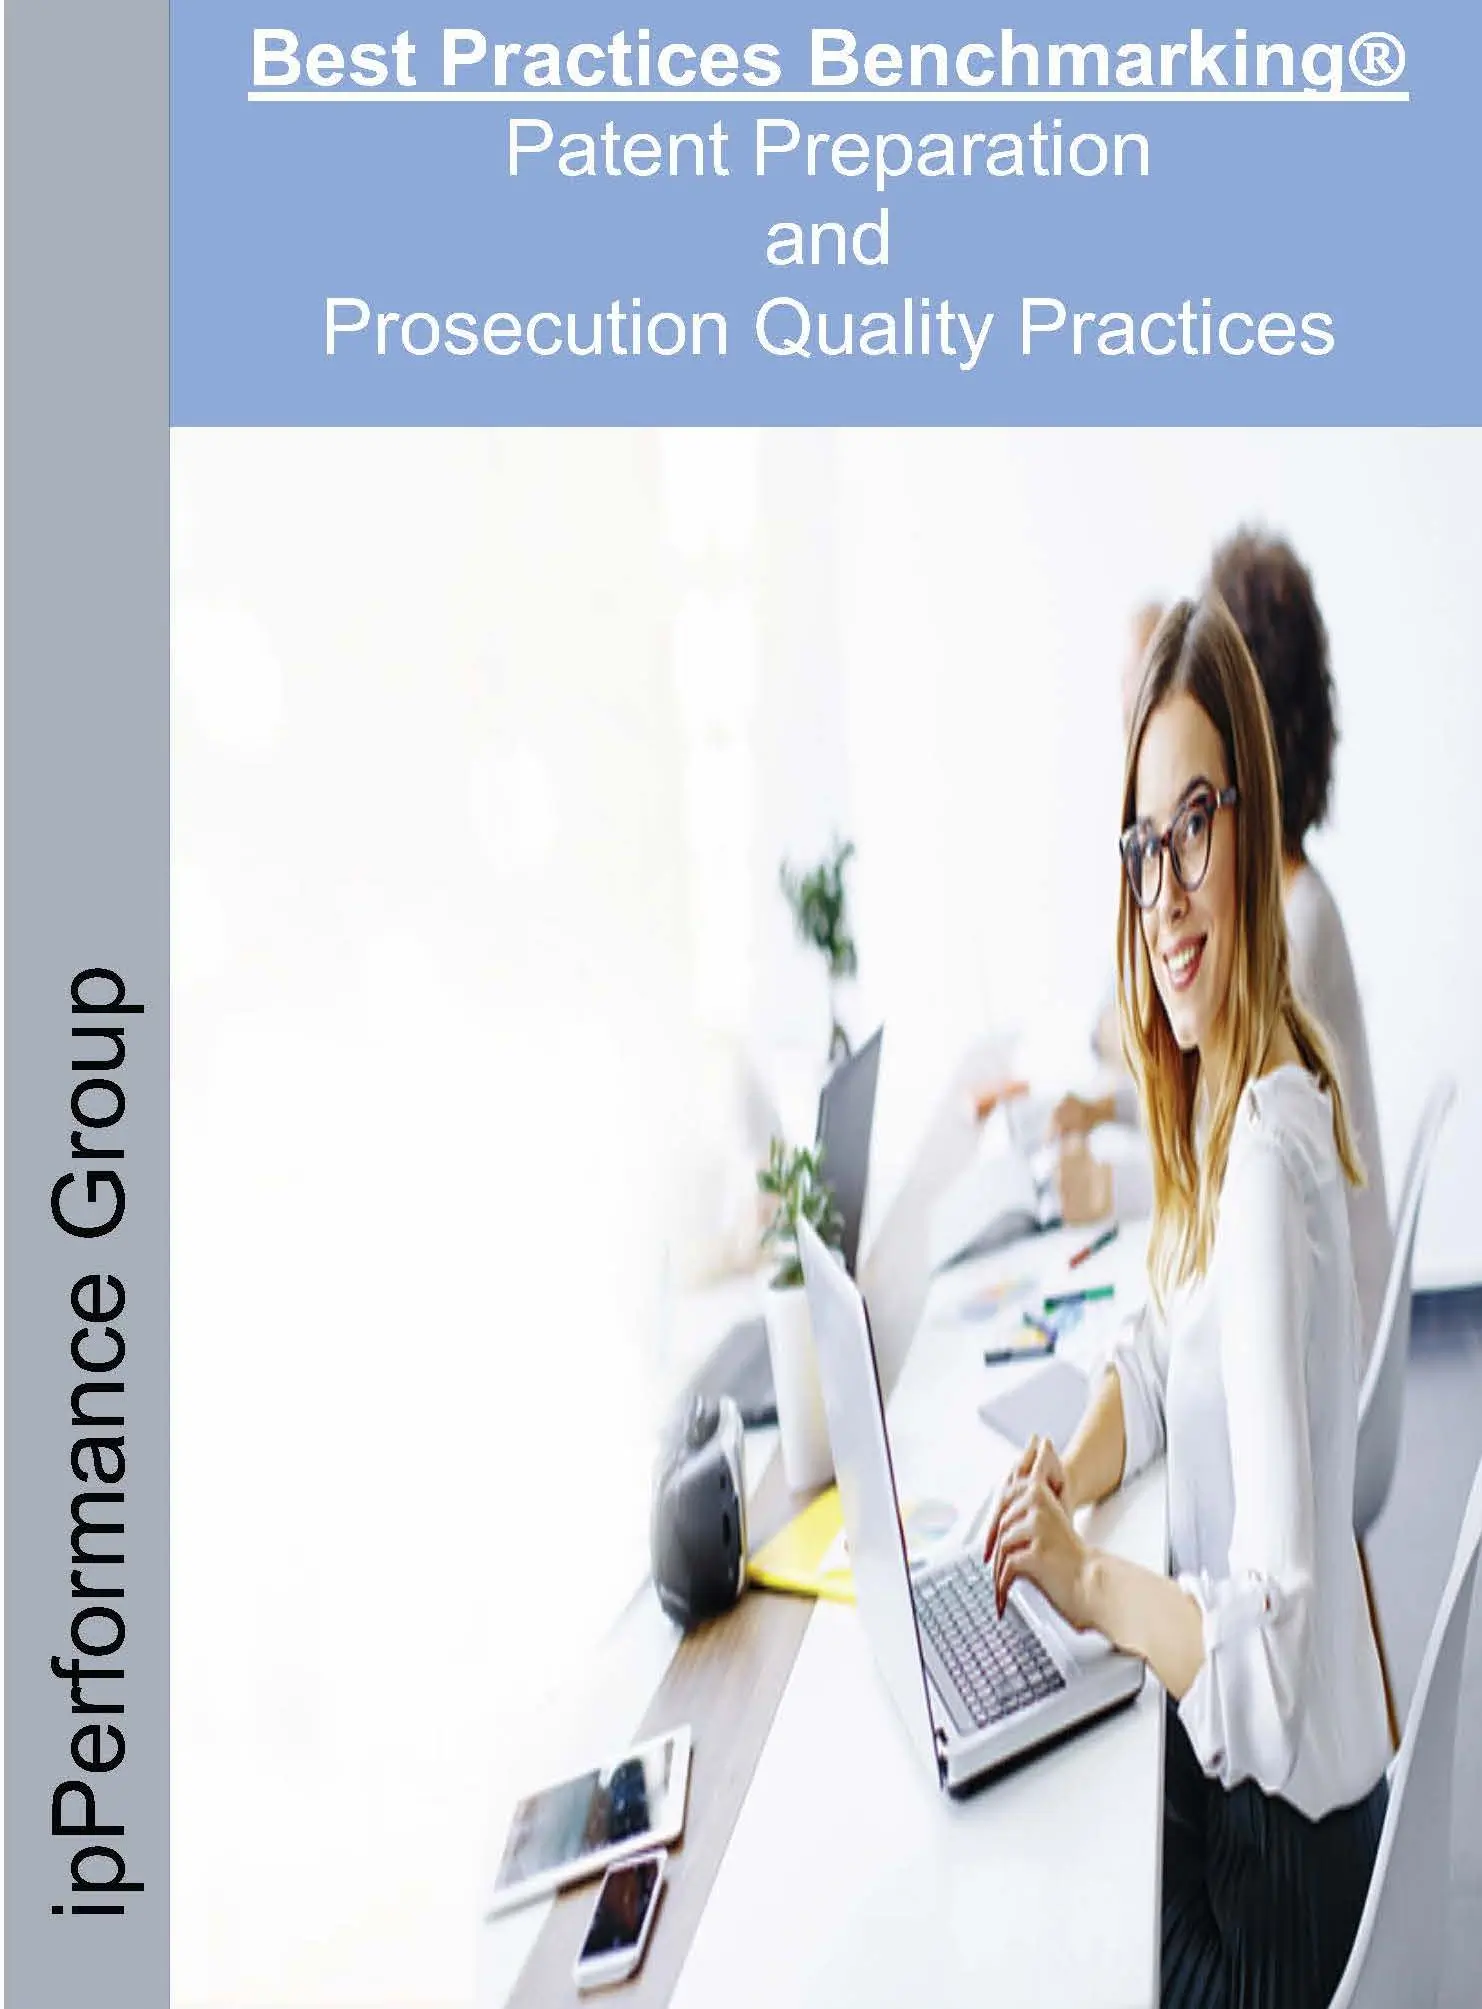 Patent-Preparation-and-Prosecution-Quality-Practices-Benchmark-Report